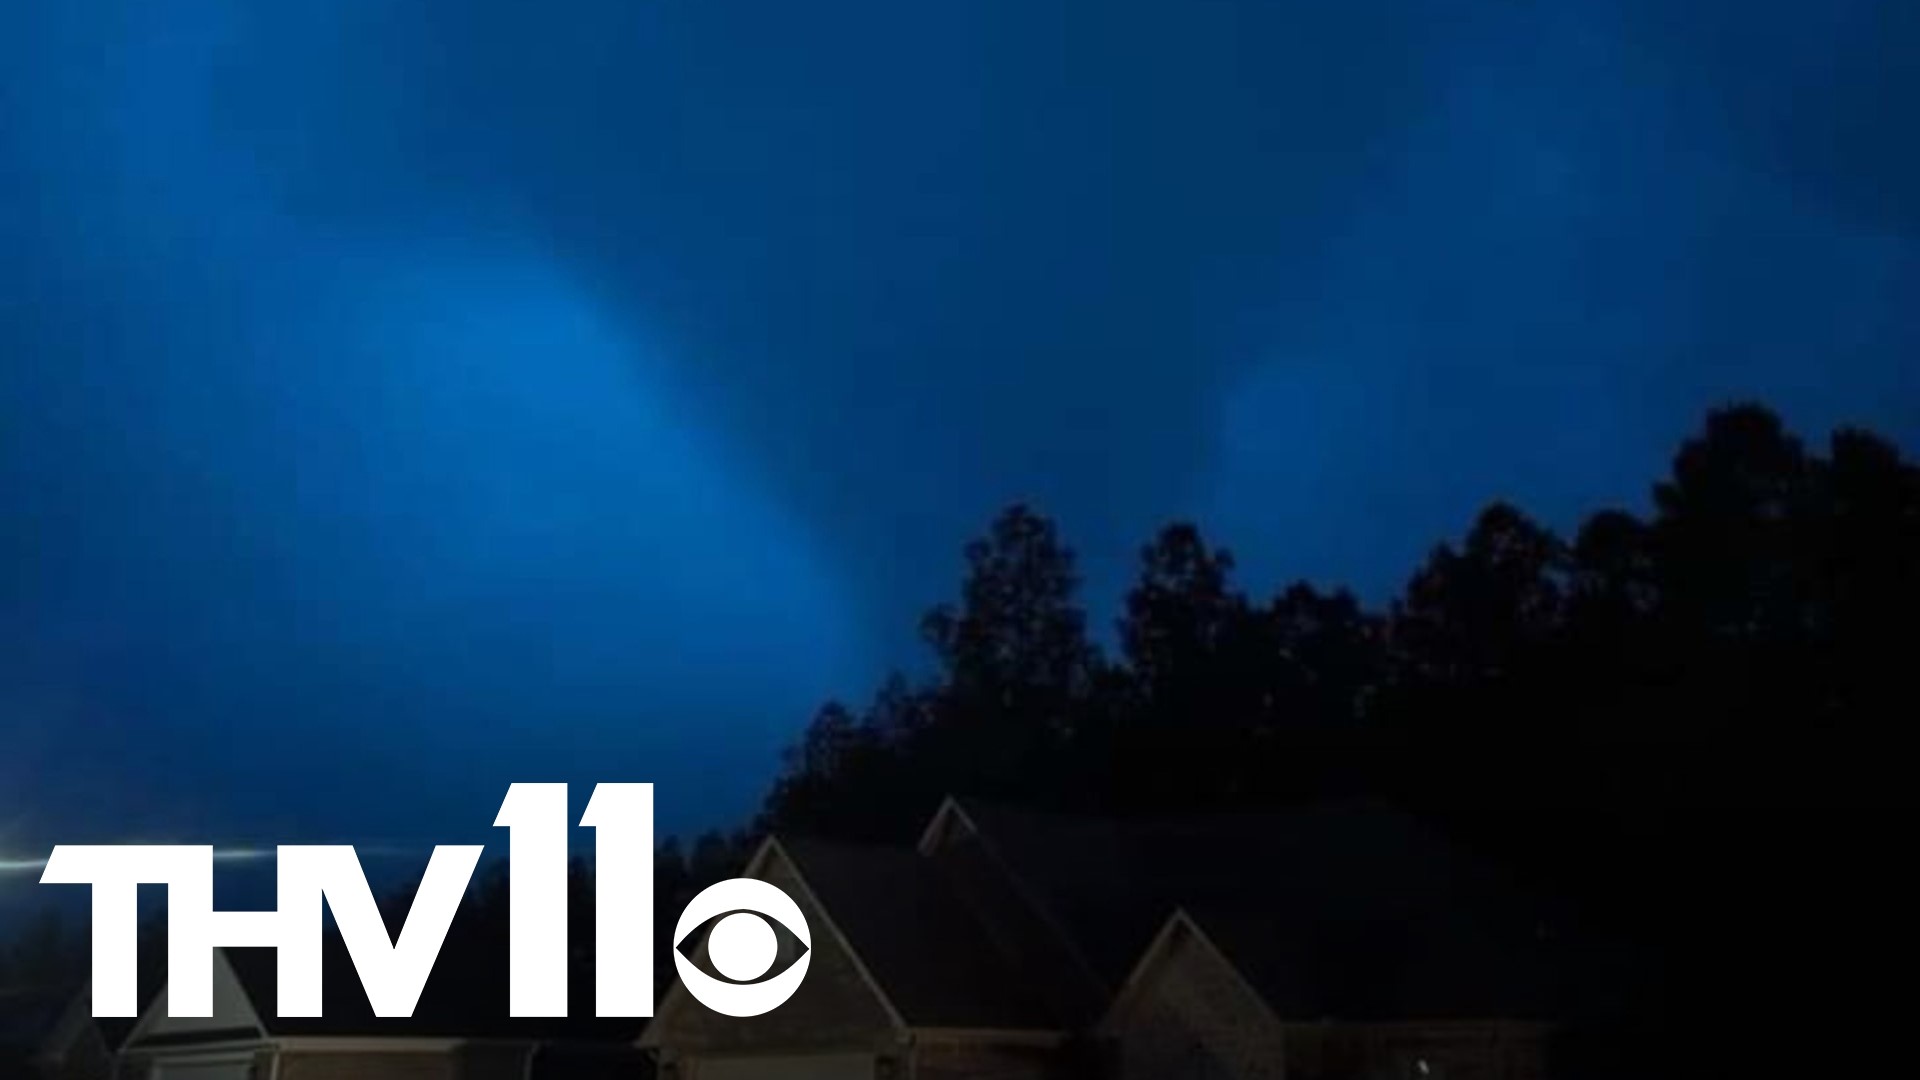 Crews with the National Weather Service Little Rock have now confirmed that an EF-1 tornado hit the areas near Sardis and East End in Saline County on Saturday.